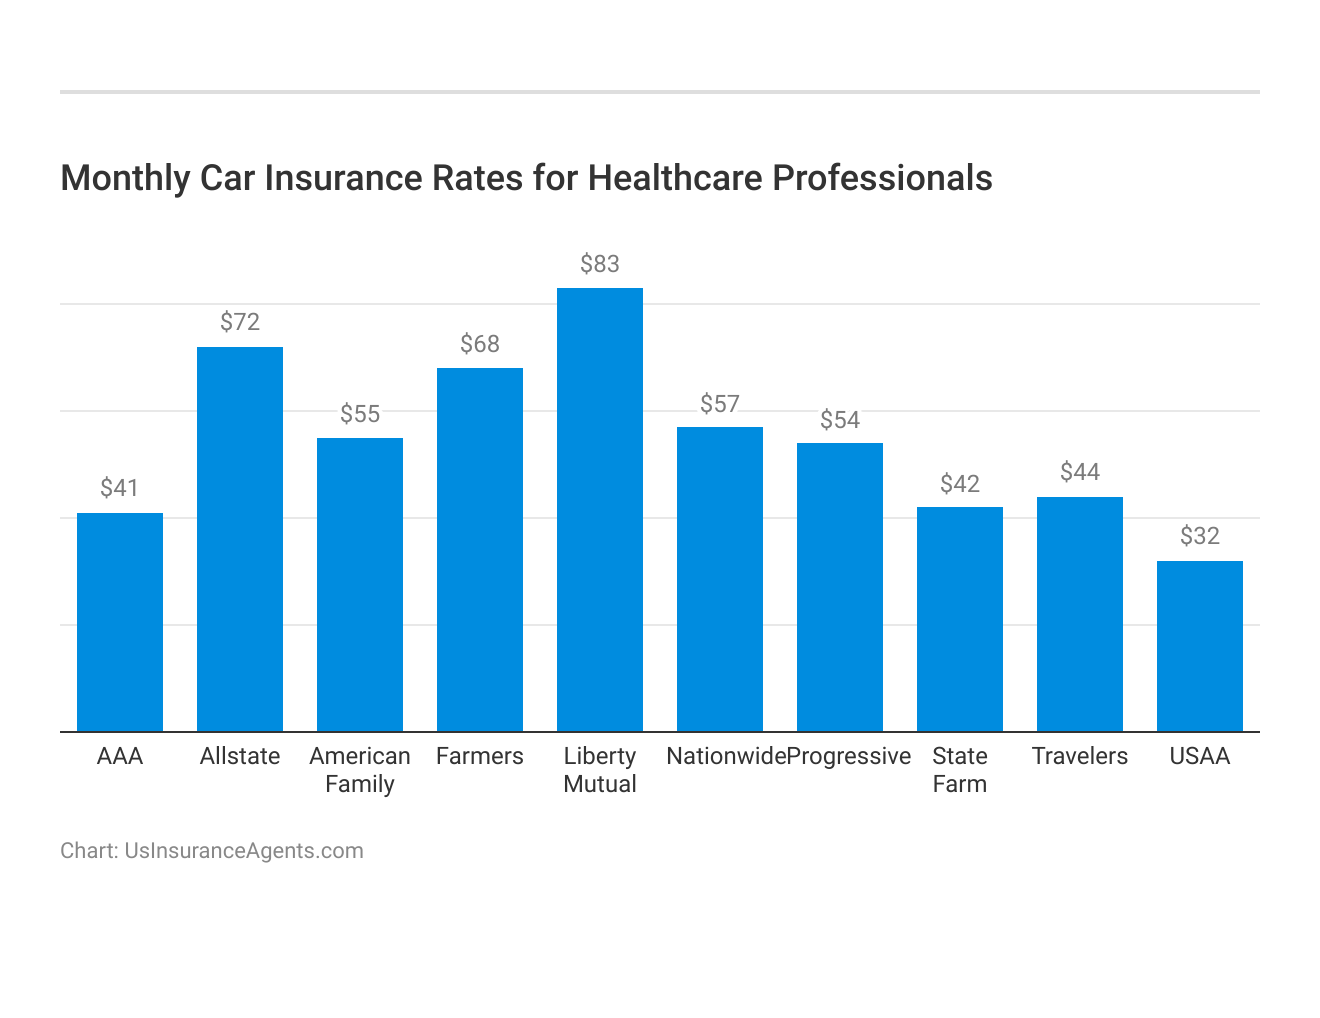 <h3>Monthly Car Insurance Rates for Healthcare Professionals</h3>